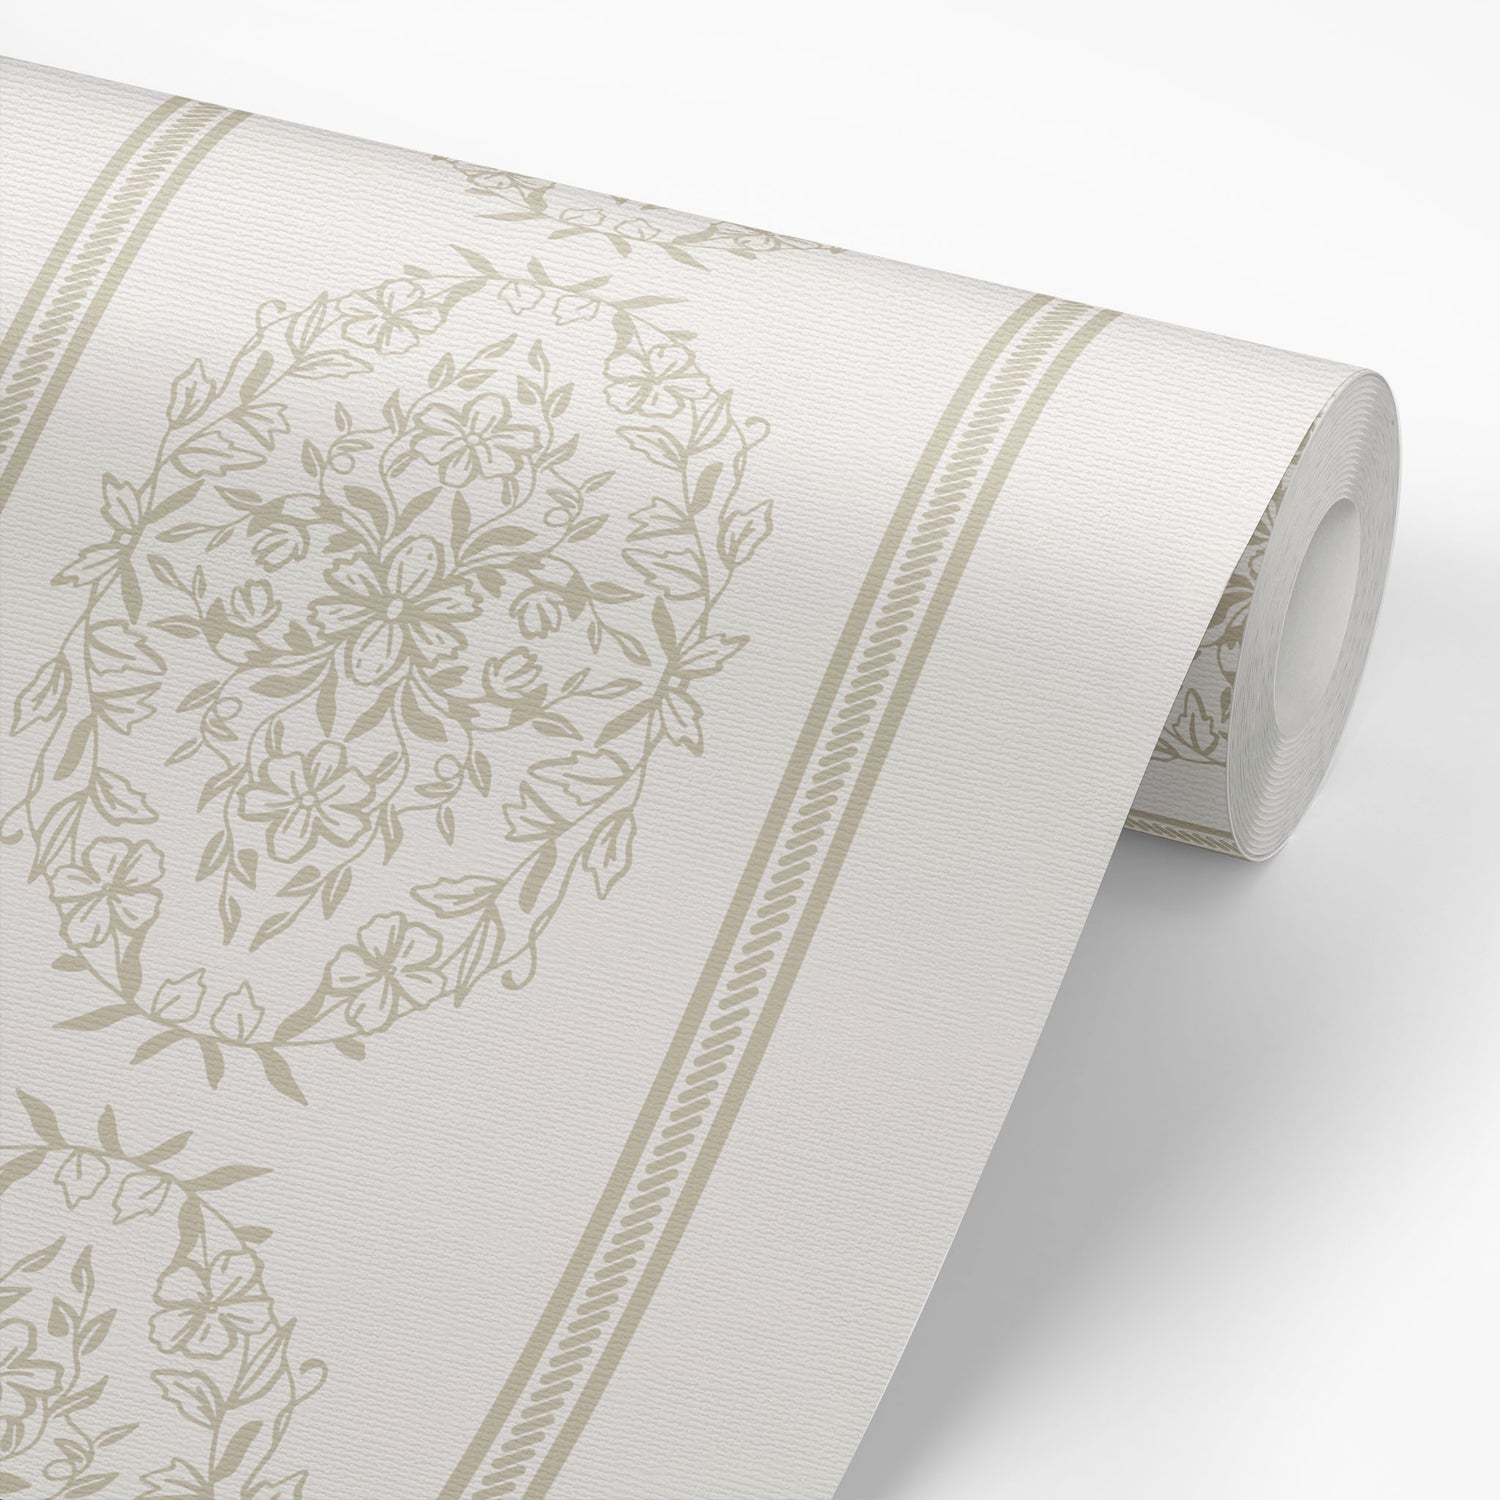 Upgrade your home decor with Milton Wallpaper. Its high-end look and stunning design will elevate any room. Made with top-quality materials, this wallpaper is the perfect choice for adding a touch of elegance to your space. Transform your walls and create a beautiful, sophisticated atmosphere shown on a camera roll.